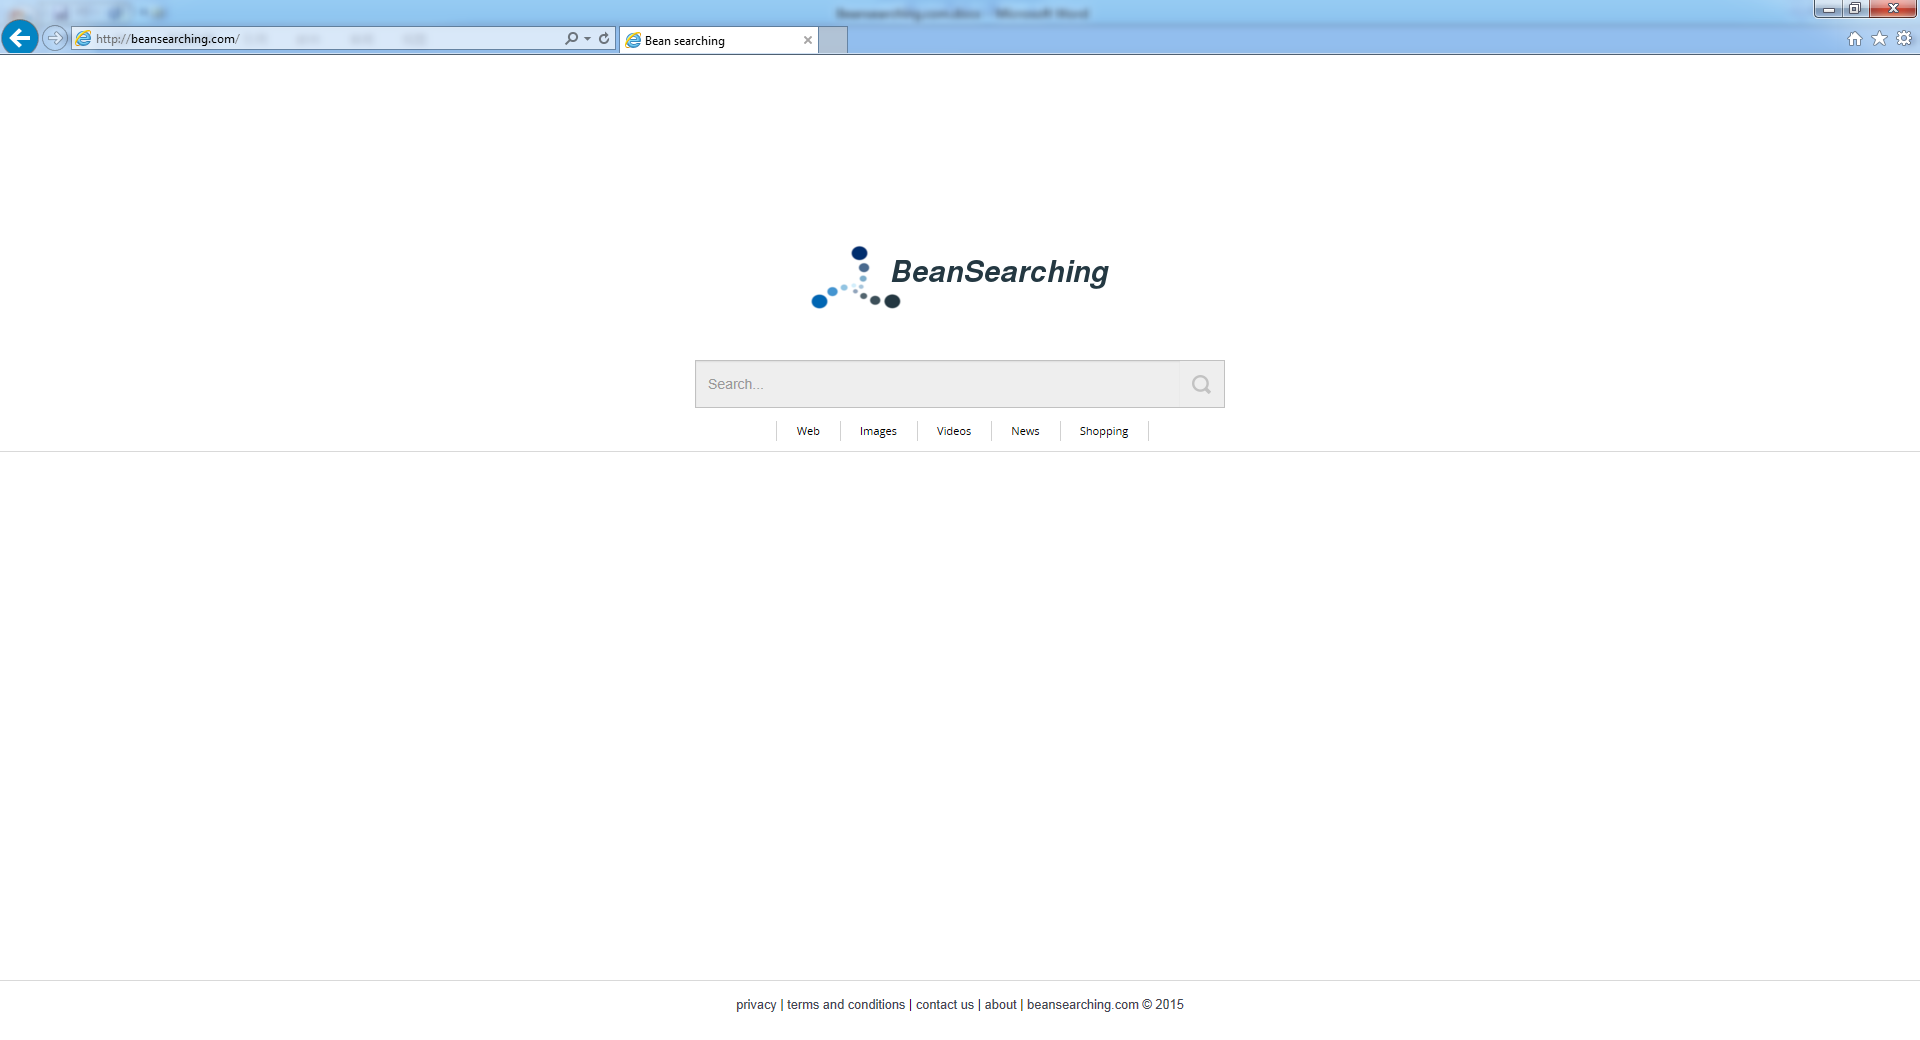 Beansearching.com